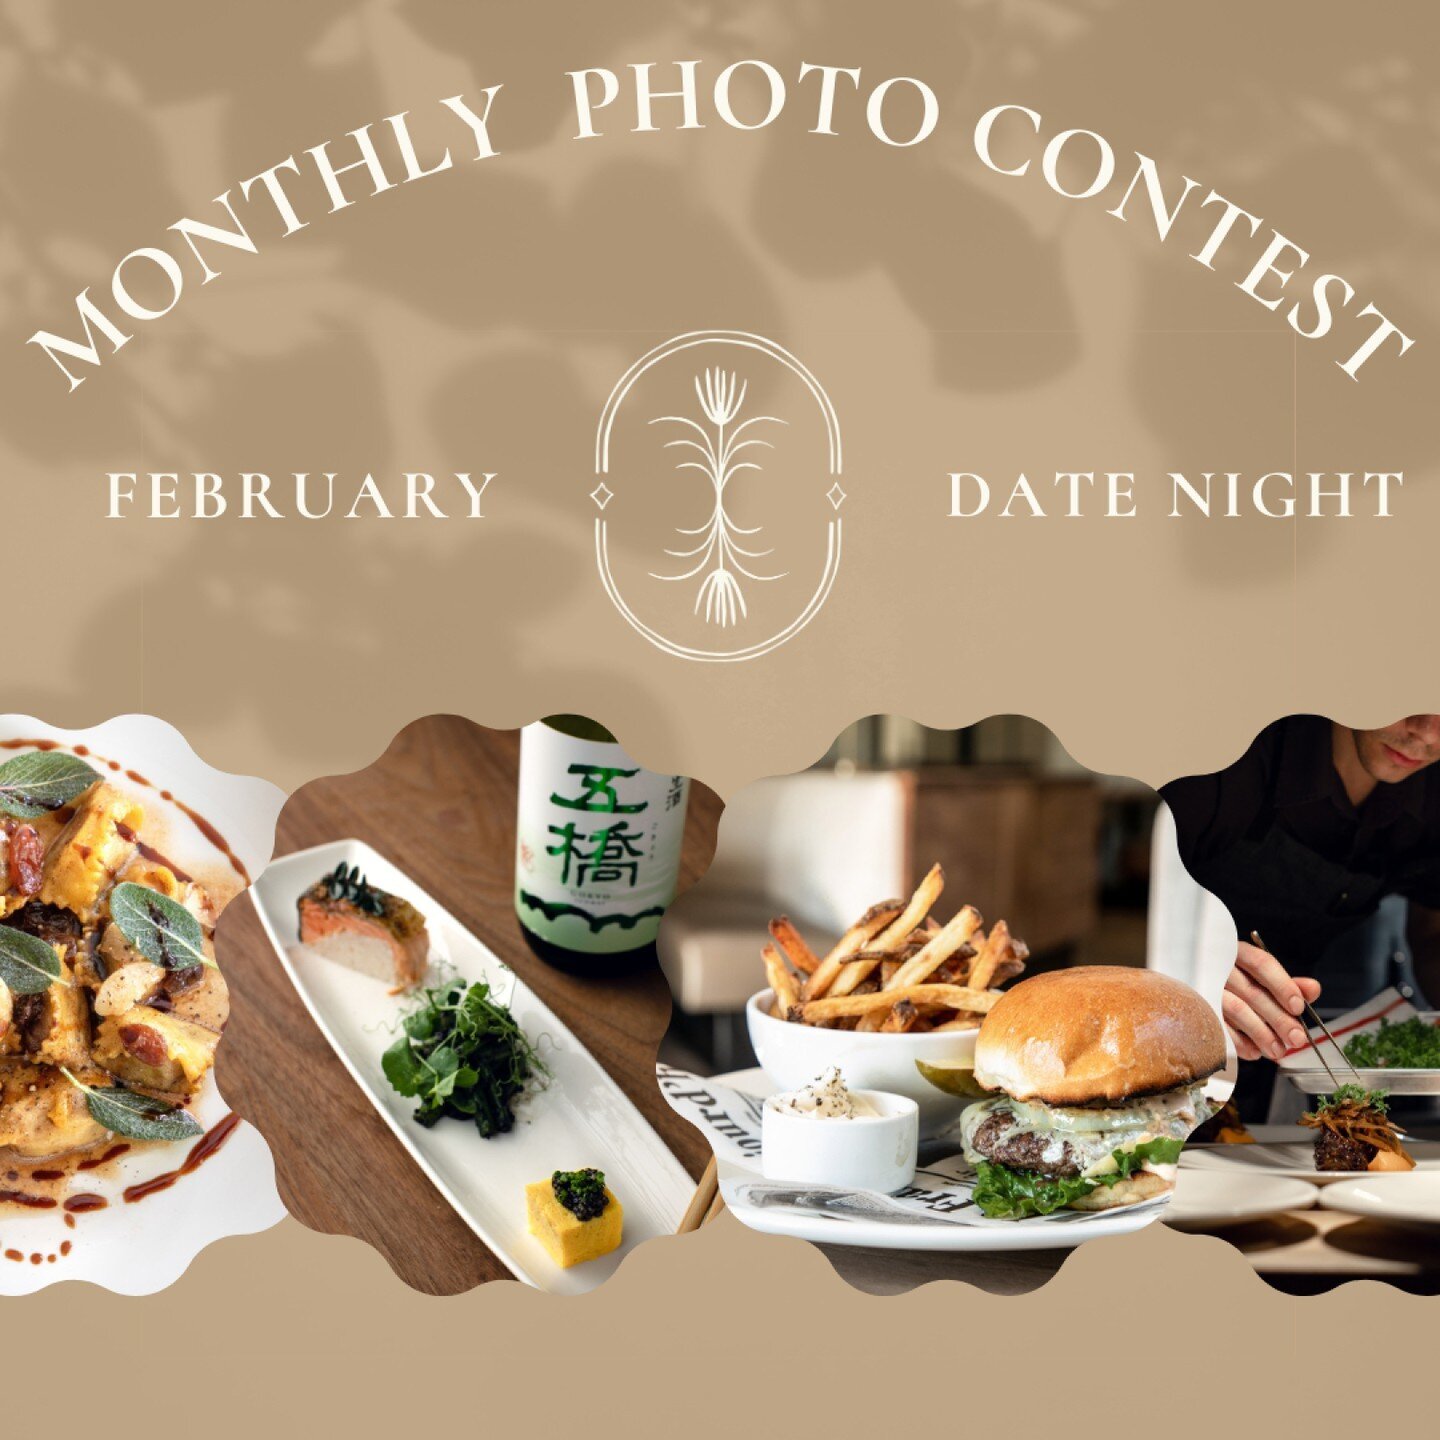 We are absolutely delighted to introduce our Monthly Photo Contest! Each month we will feature a different theme so you, our guest, can share your fantastic photos and unforgettable memories with us all month long. Each photo shared with us is an ent